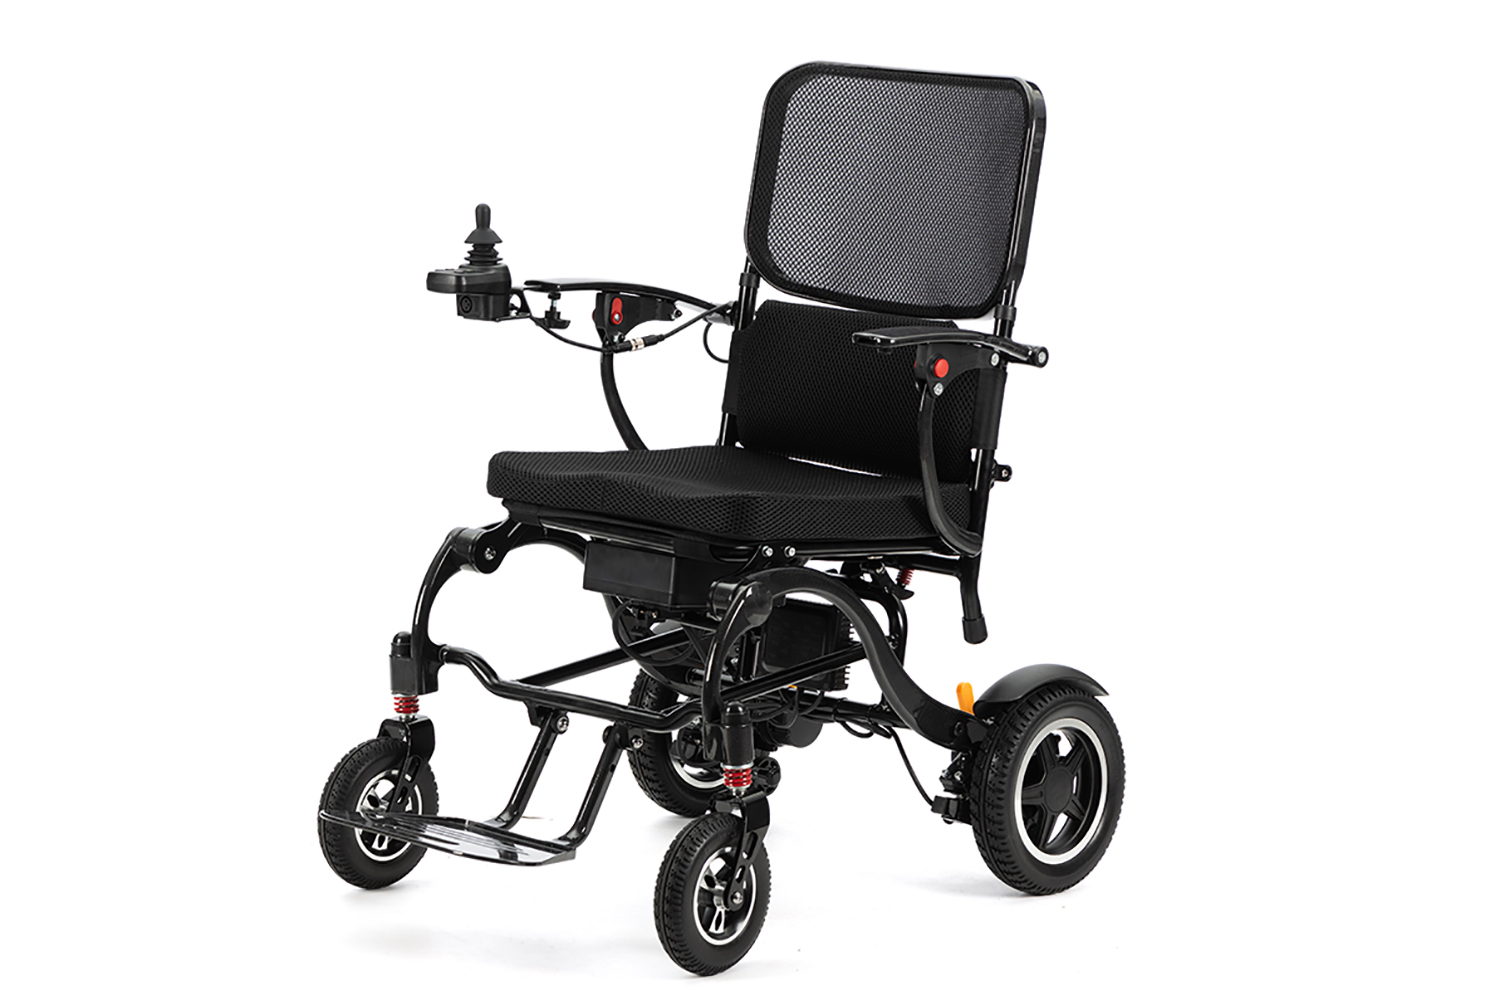 Eight advantages of carbon fiber electric wheelchairs: the perfect combination of lightweight and durability